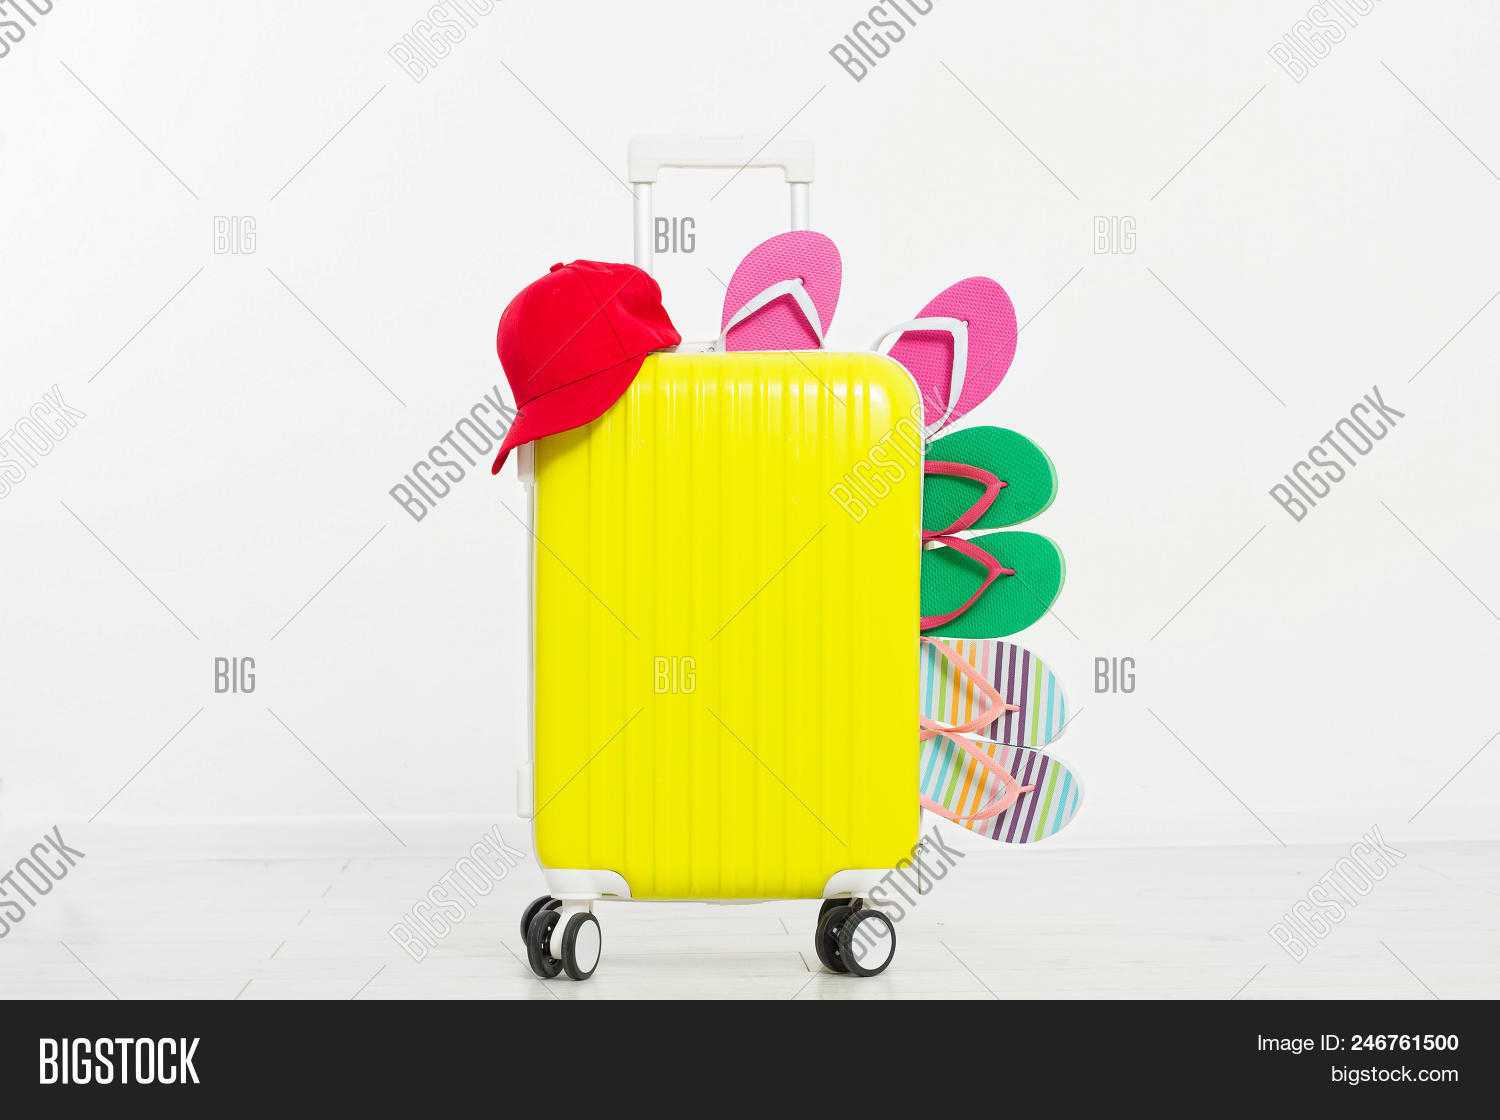 Suitcase Isolated On Image & Photo (Free Trial) | Bigstock Within Blank Suitcase Template